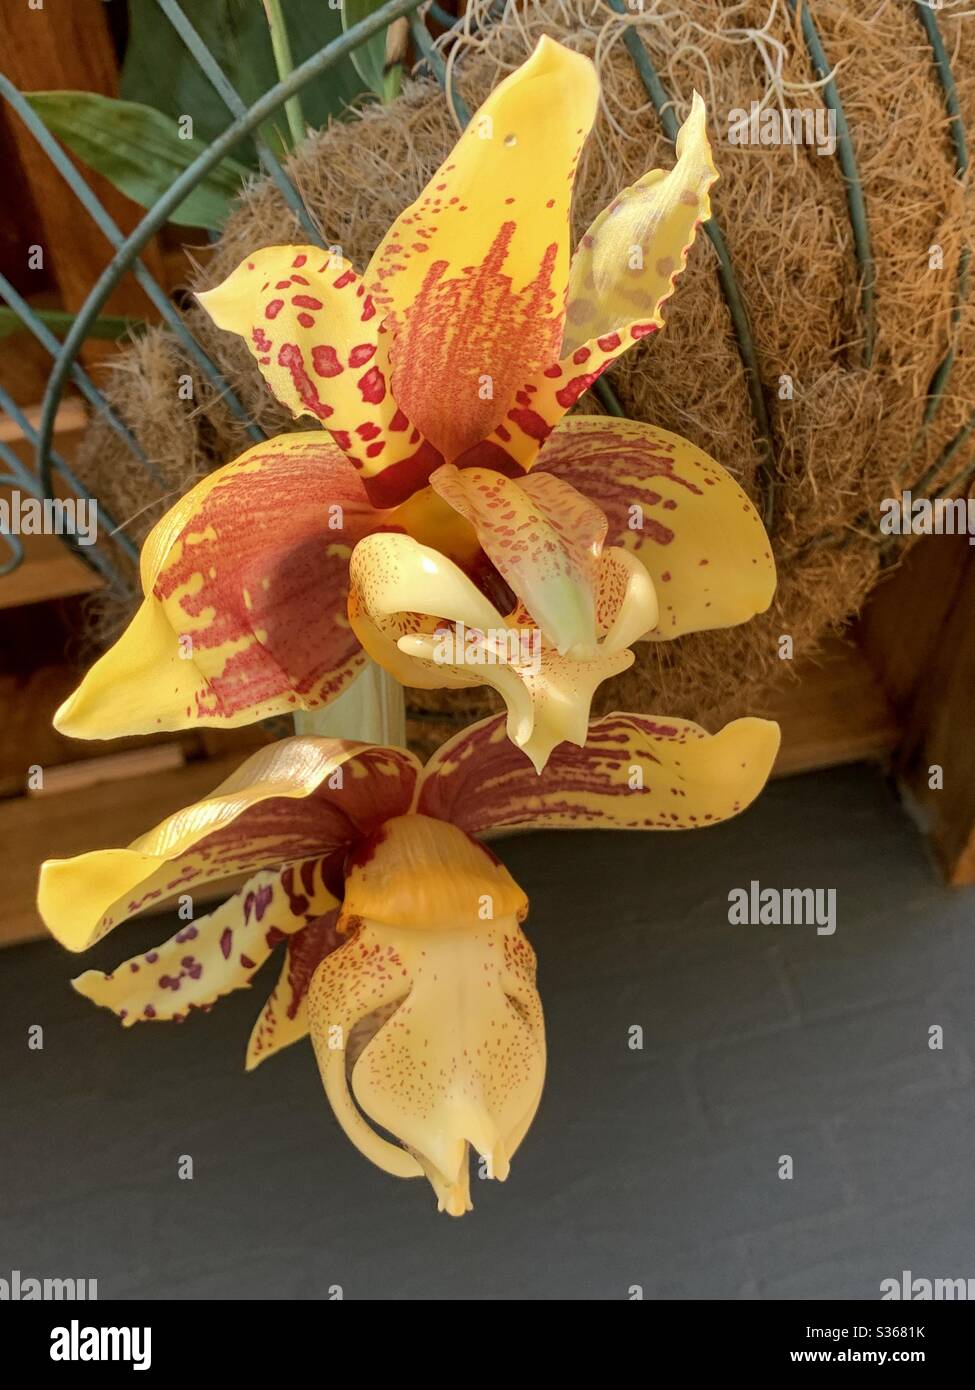 Brilliant golden Stanhopea orchids or upside down orchid flowers hanging from the bottom of the basket, Australian coastal sub tropical garden Stock Photo